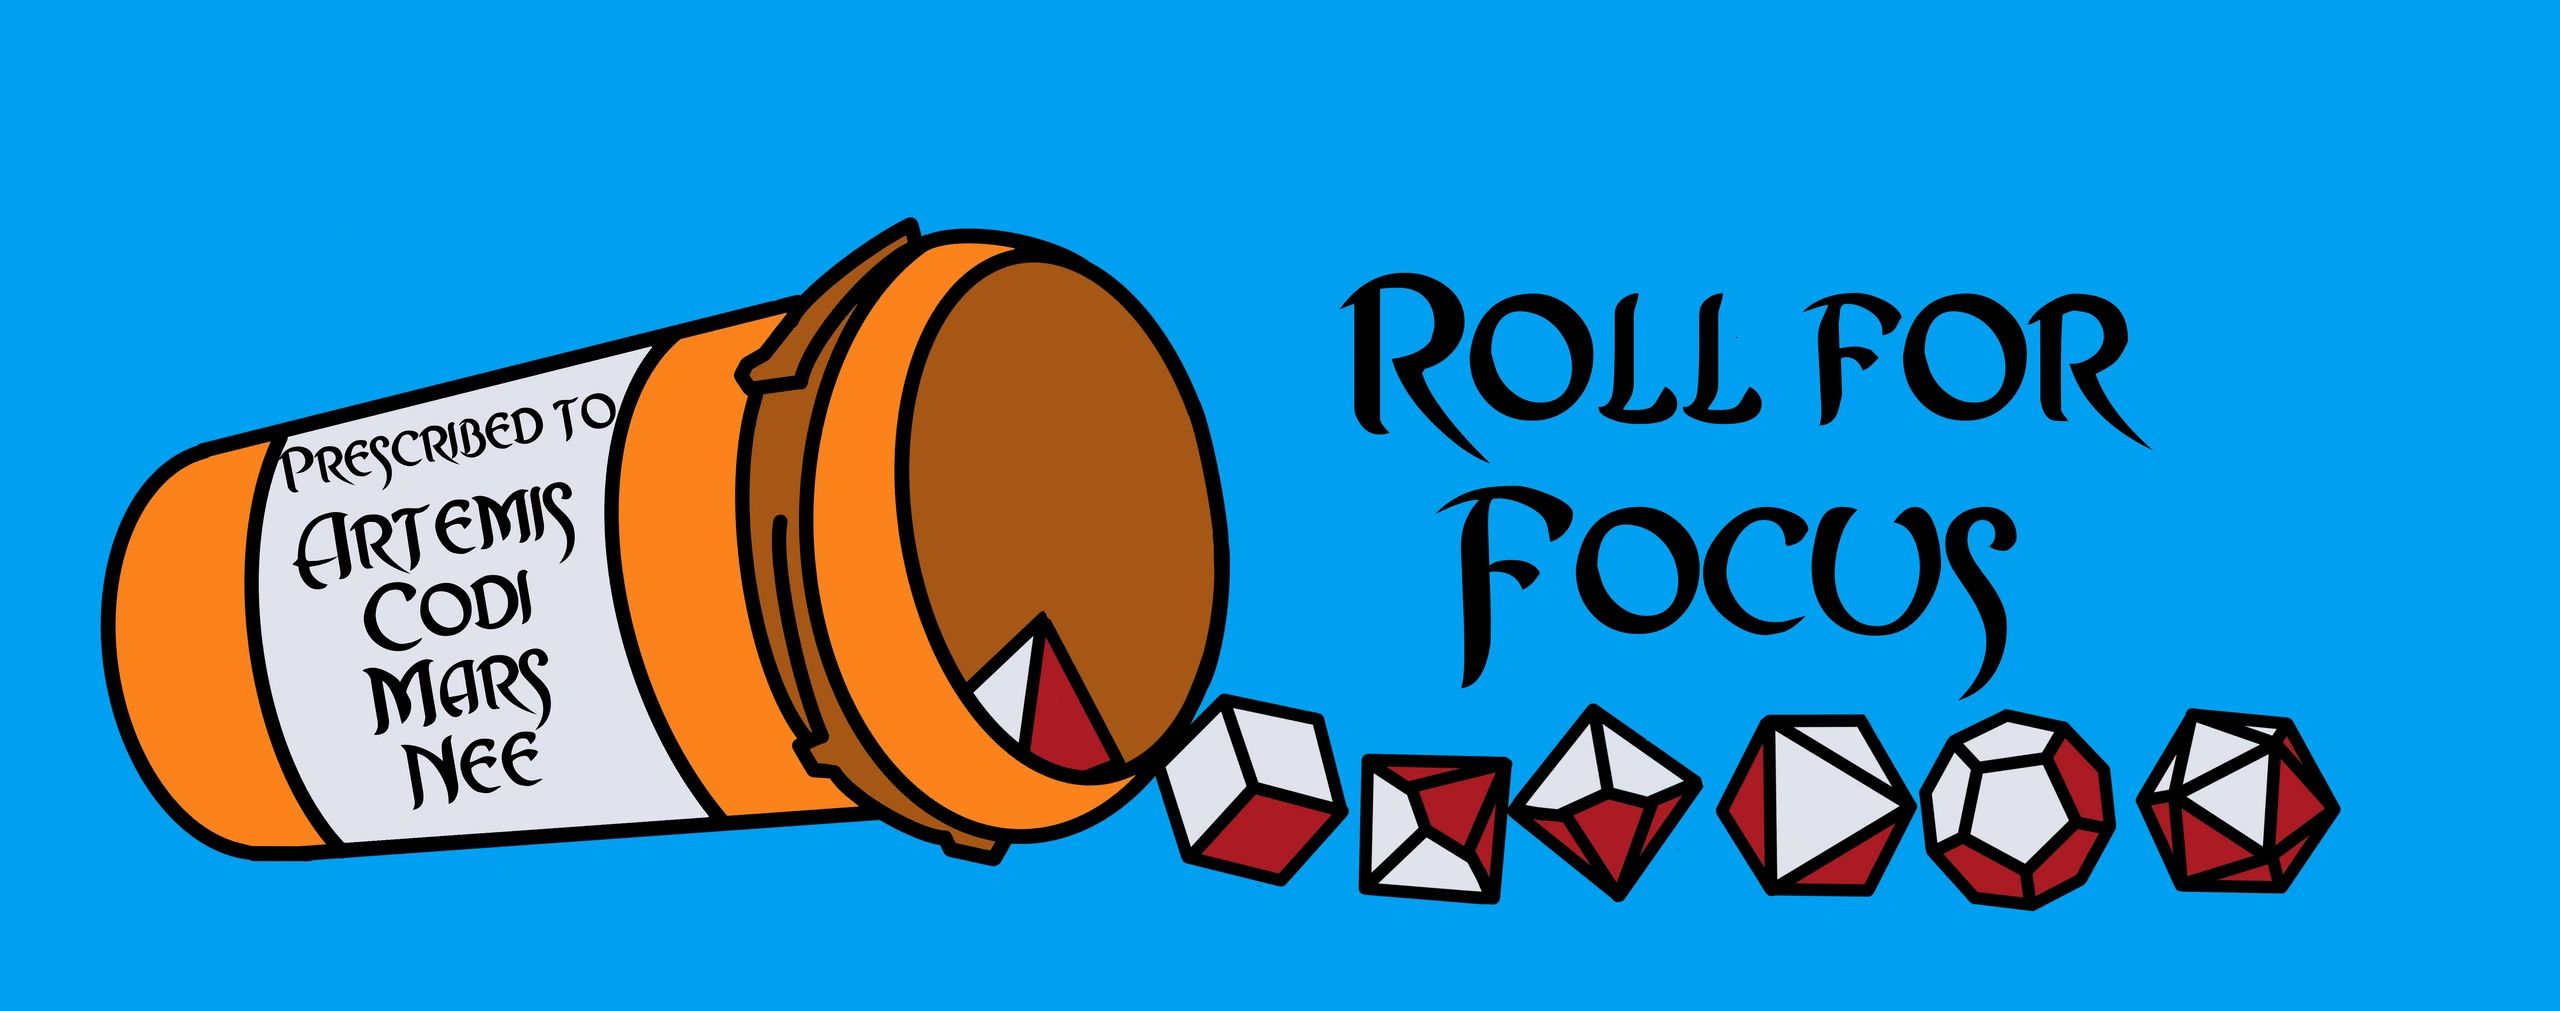 Roll For Focus